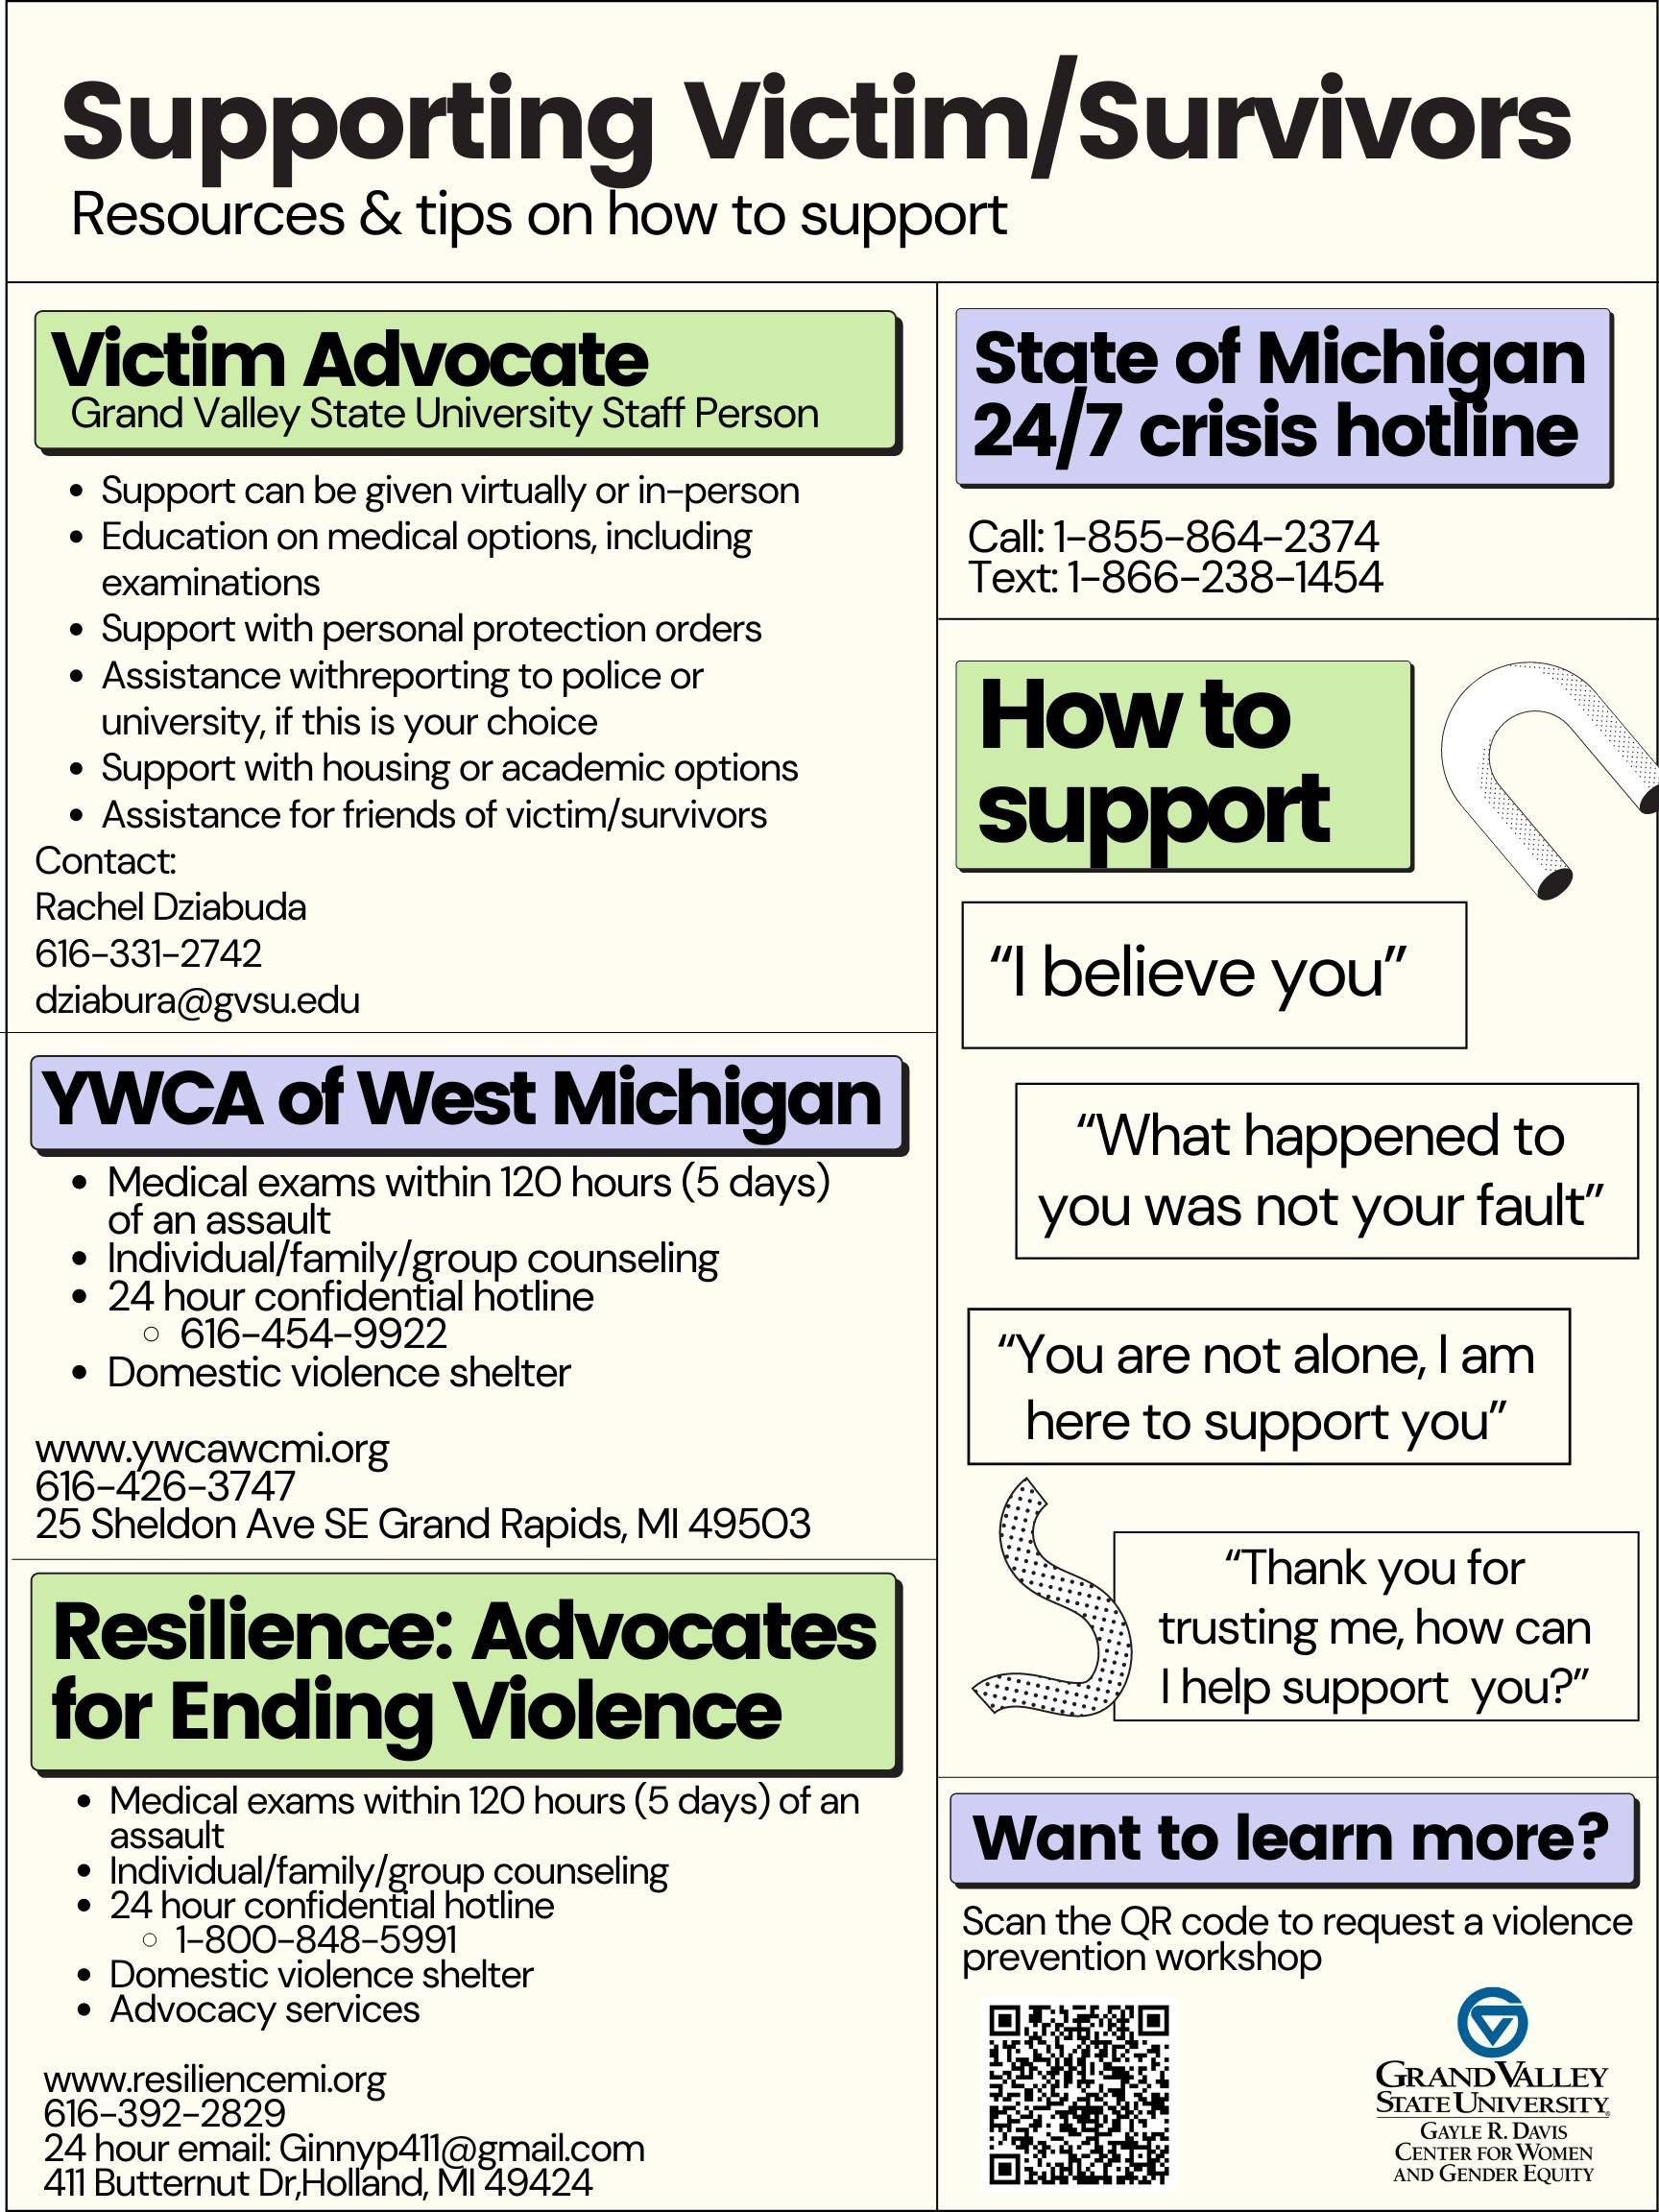 Guide to supporting survivors